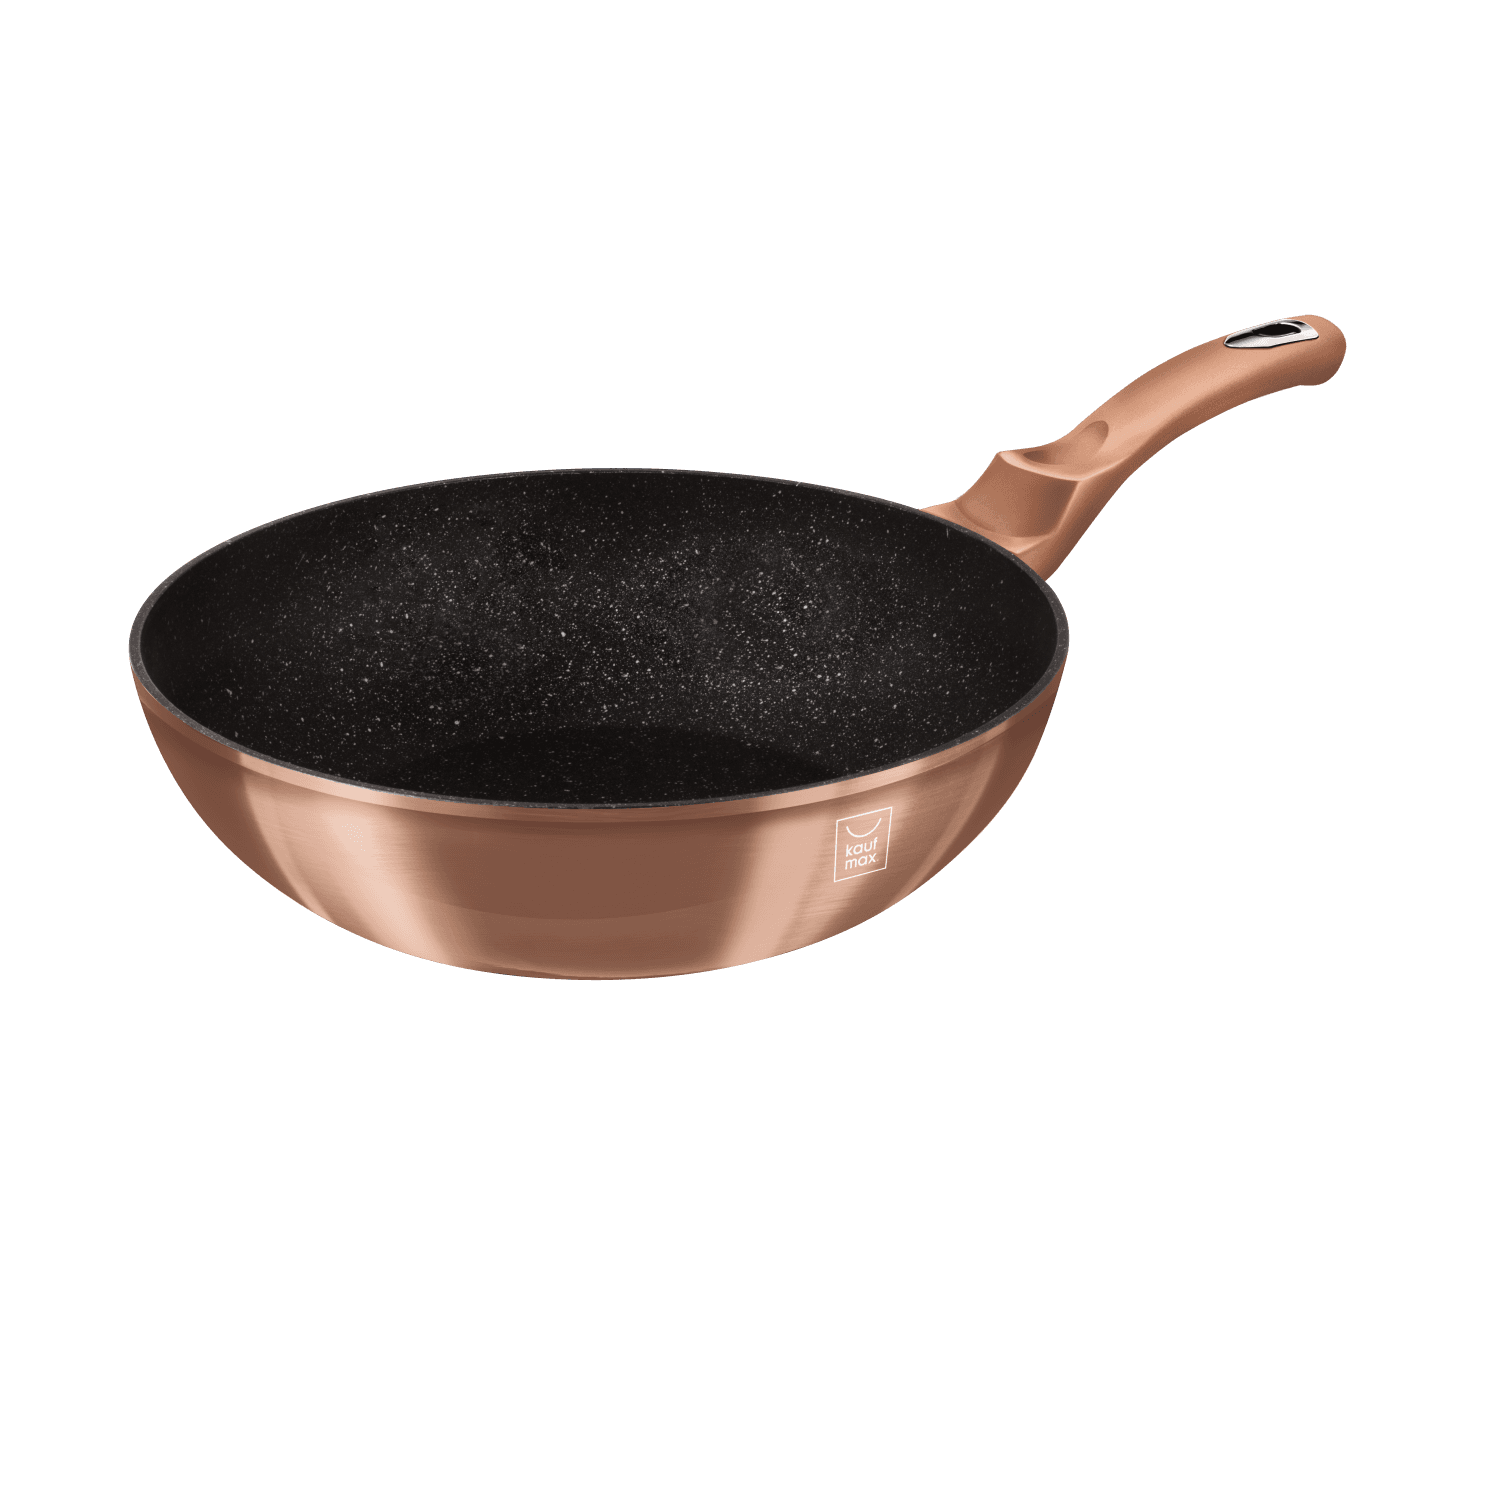 Selected image for KAUFMAX WOK Tiganj Rose Gold Metalic Collection 28cm